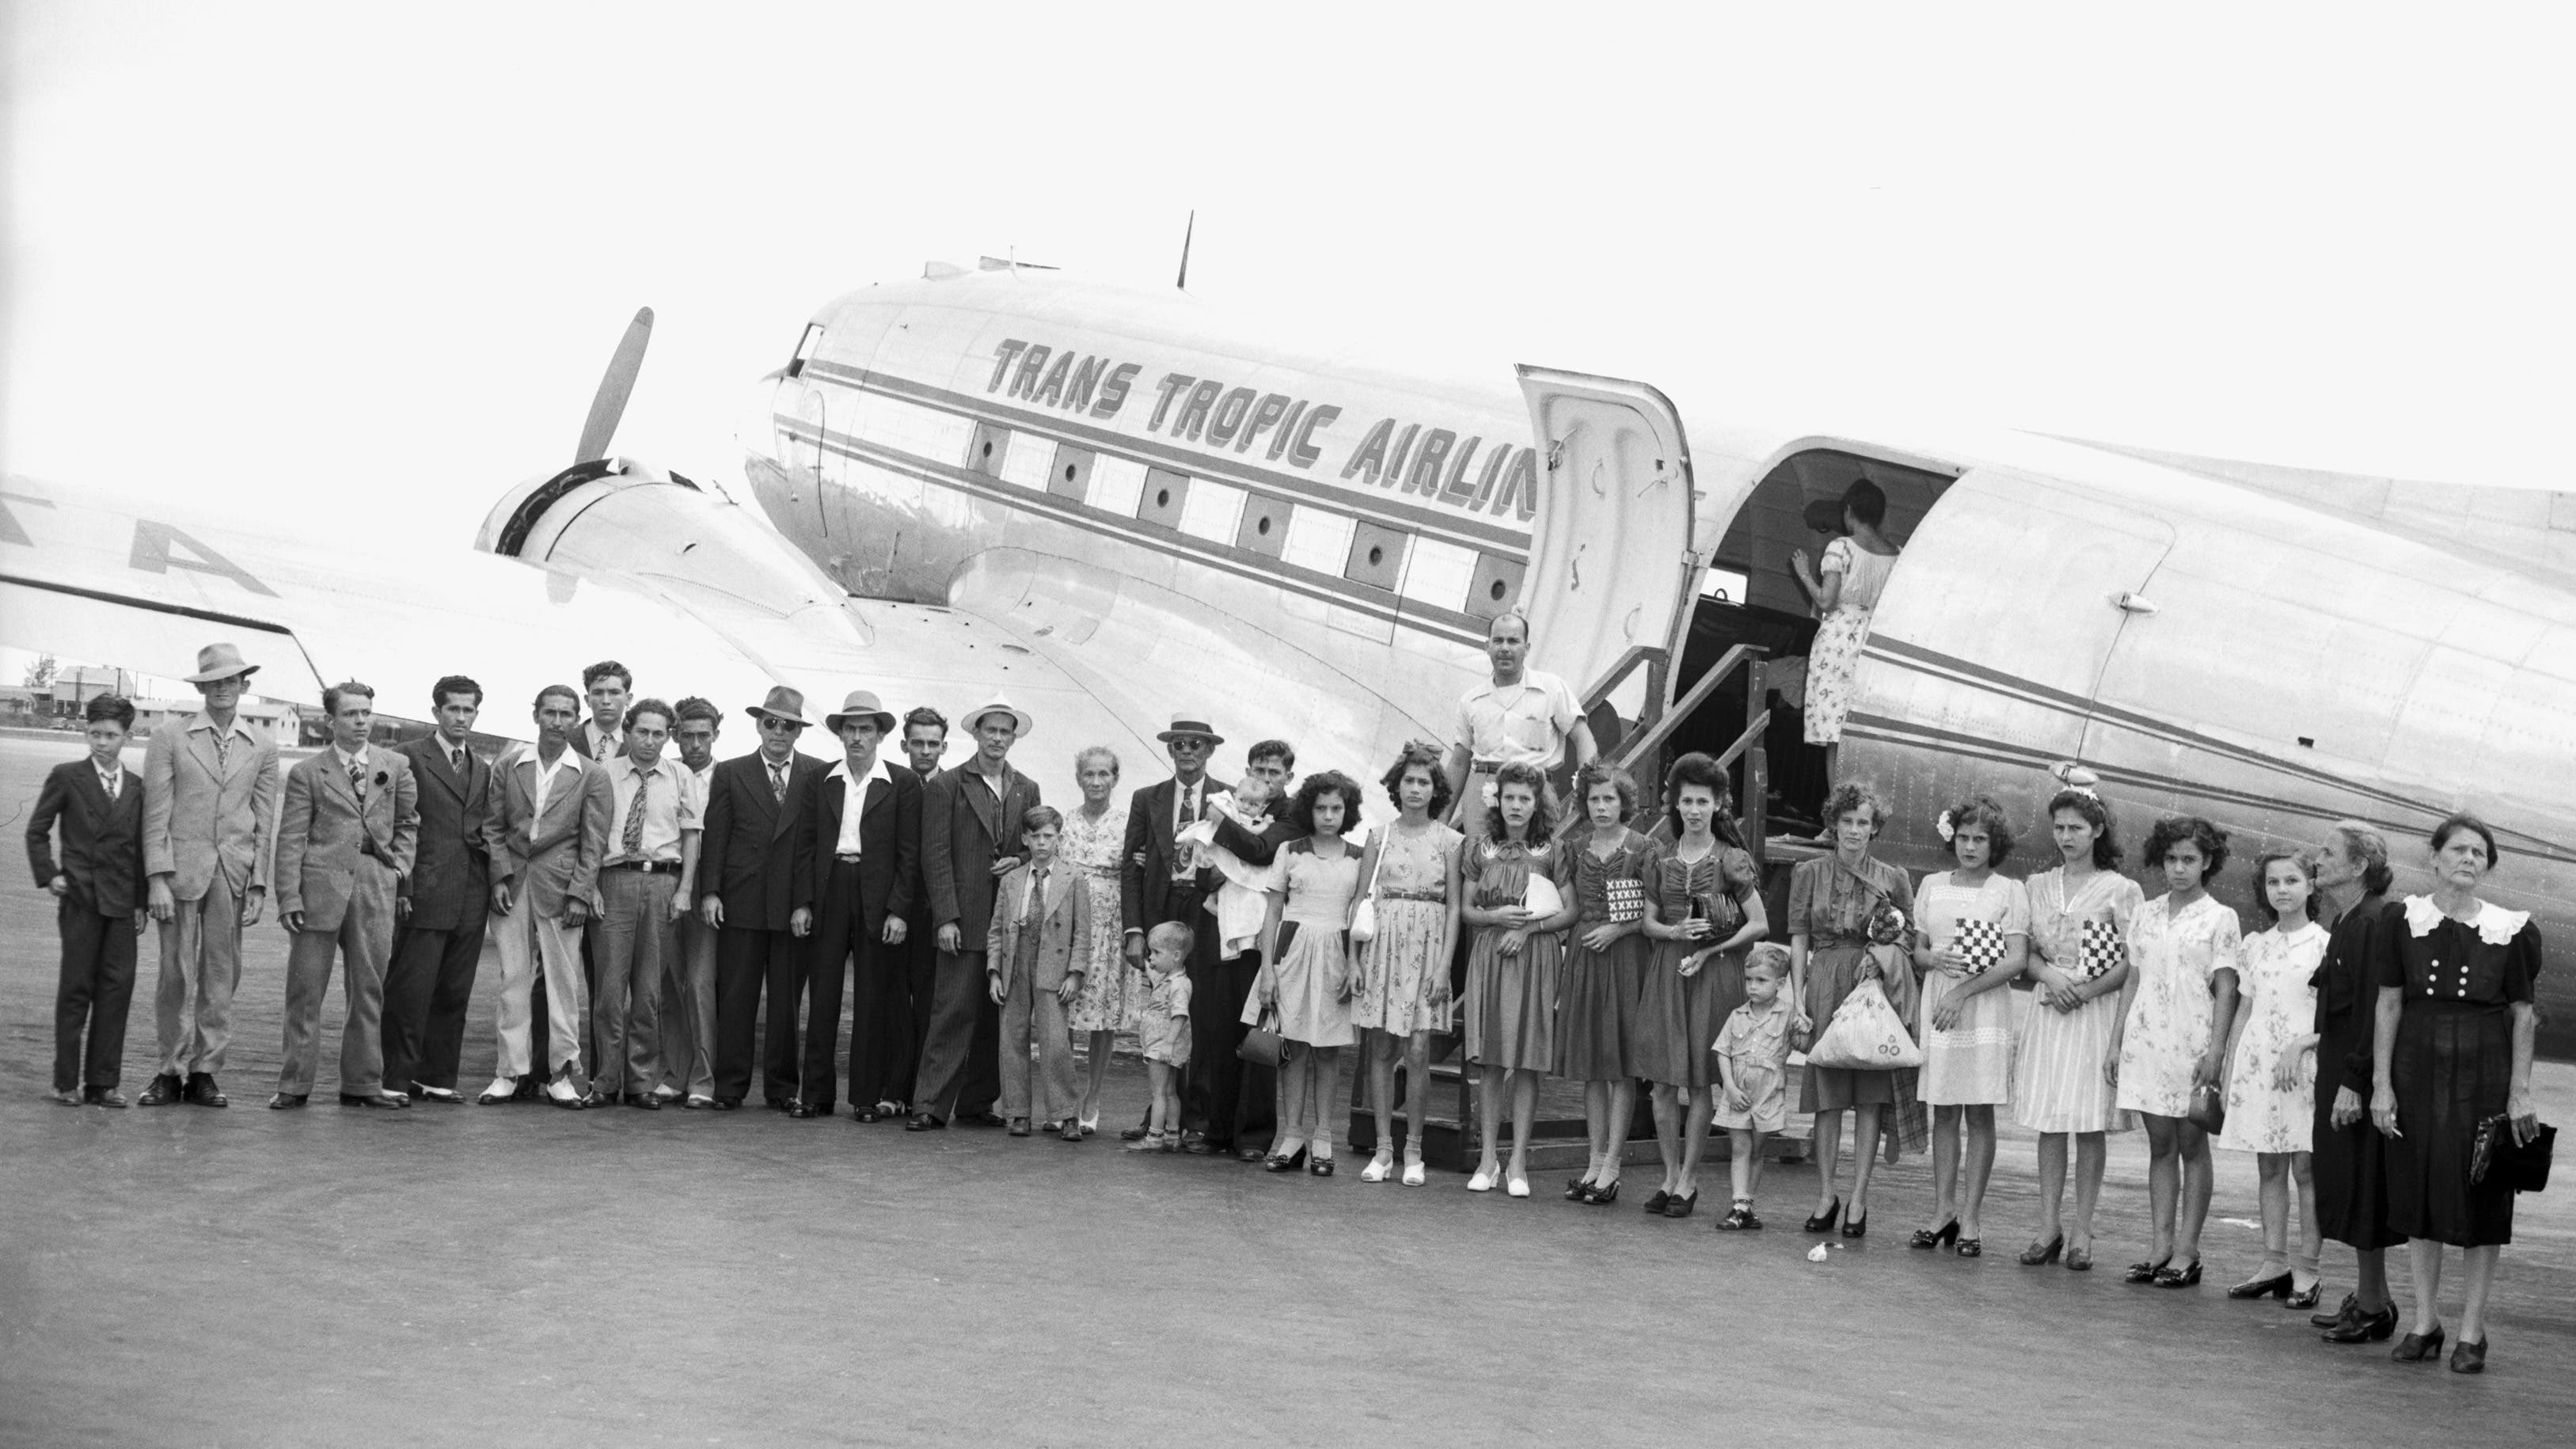 July 18, 1946: Jose Rodriguez bringing 31 family members to Brooklyn, N.Y., where he has been working, to live together in a 10-room apartment he acquired. They're shown here arriving at Miami, Florida, from Isabella, Puerto Rico. The oldest member of the party is Jose's 73-year-old grandmother, Mrs. Francisca Rodriguez Cortes, and the youngest is his four-month-old daughter.